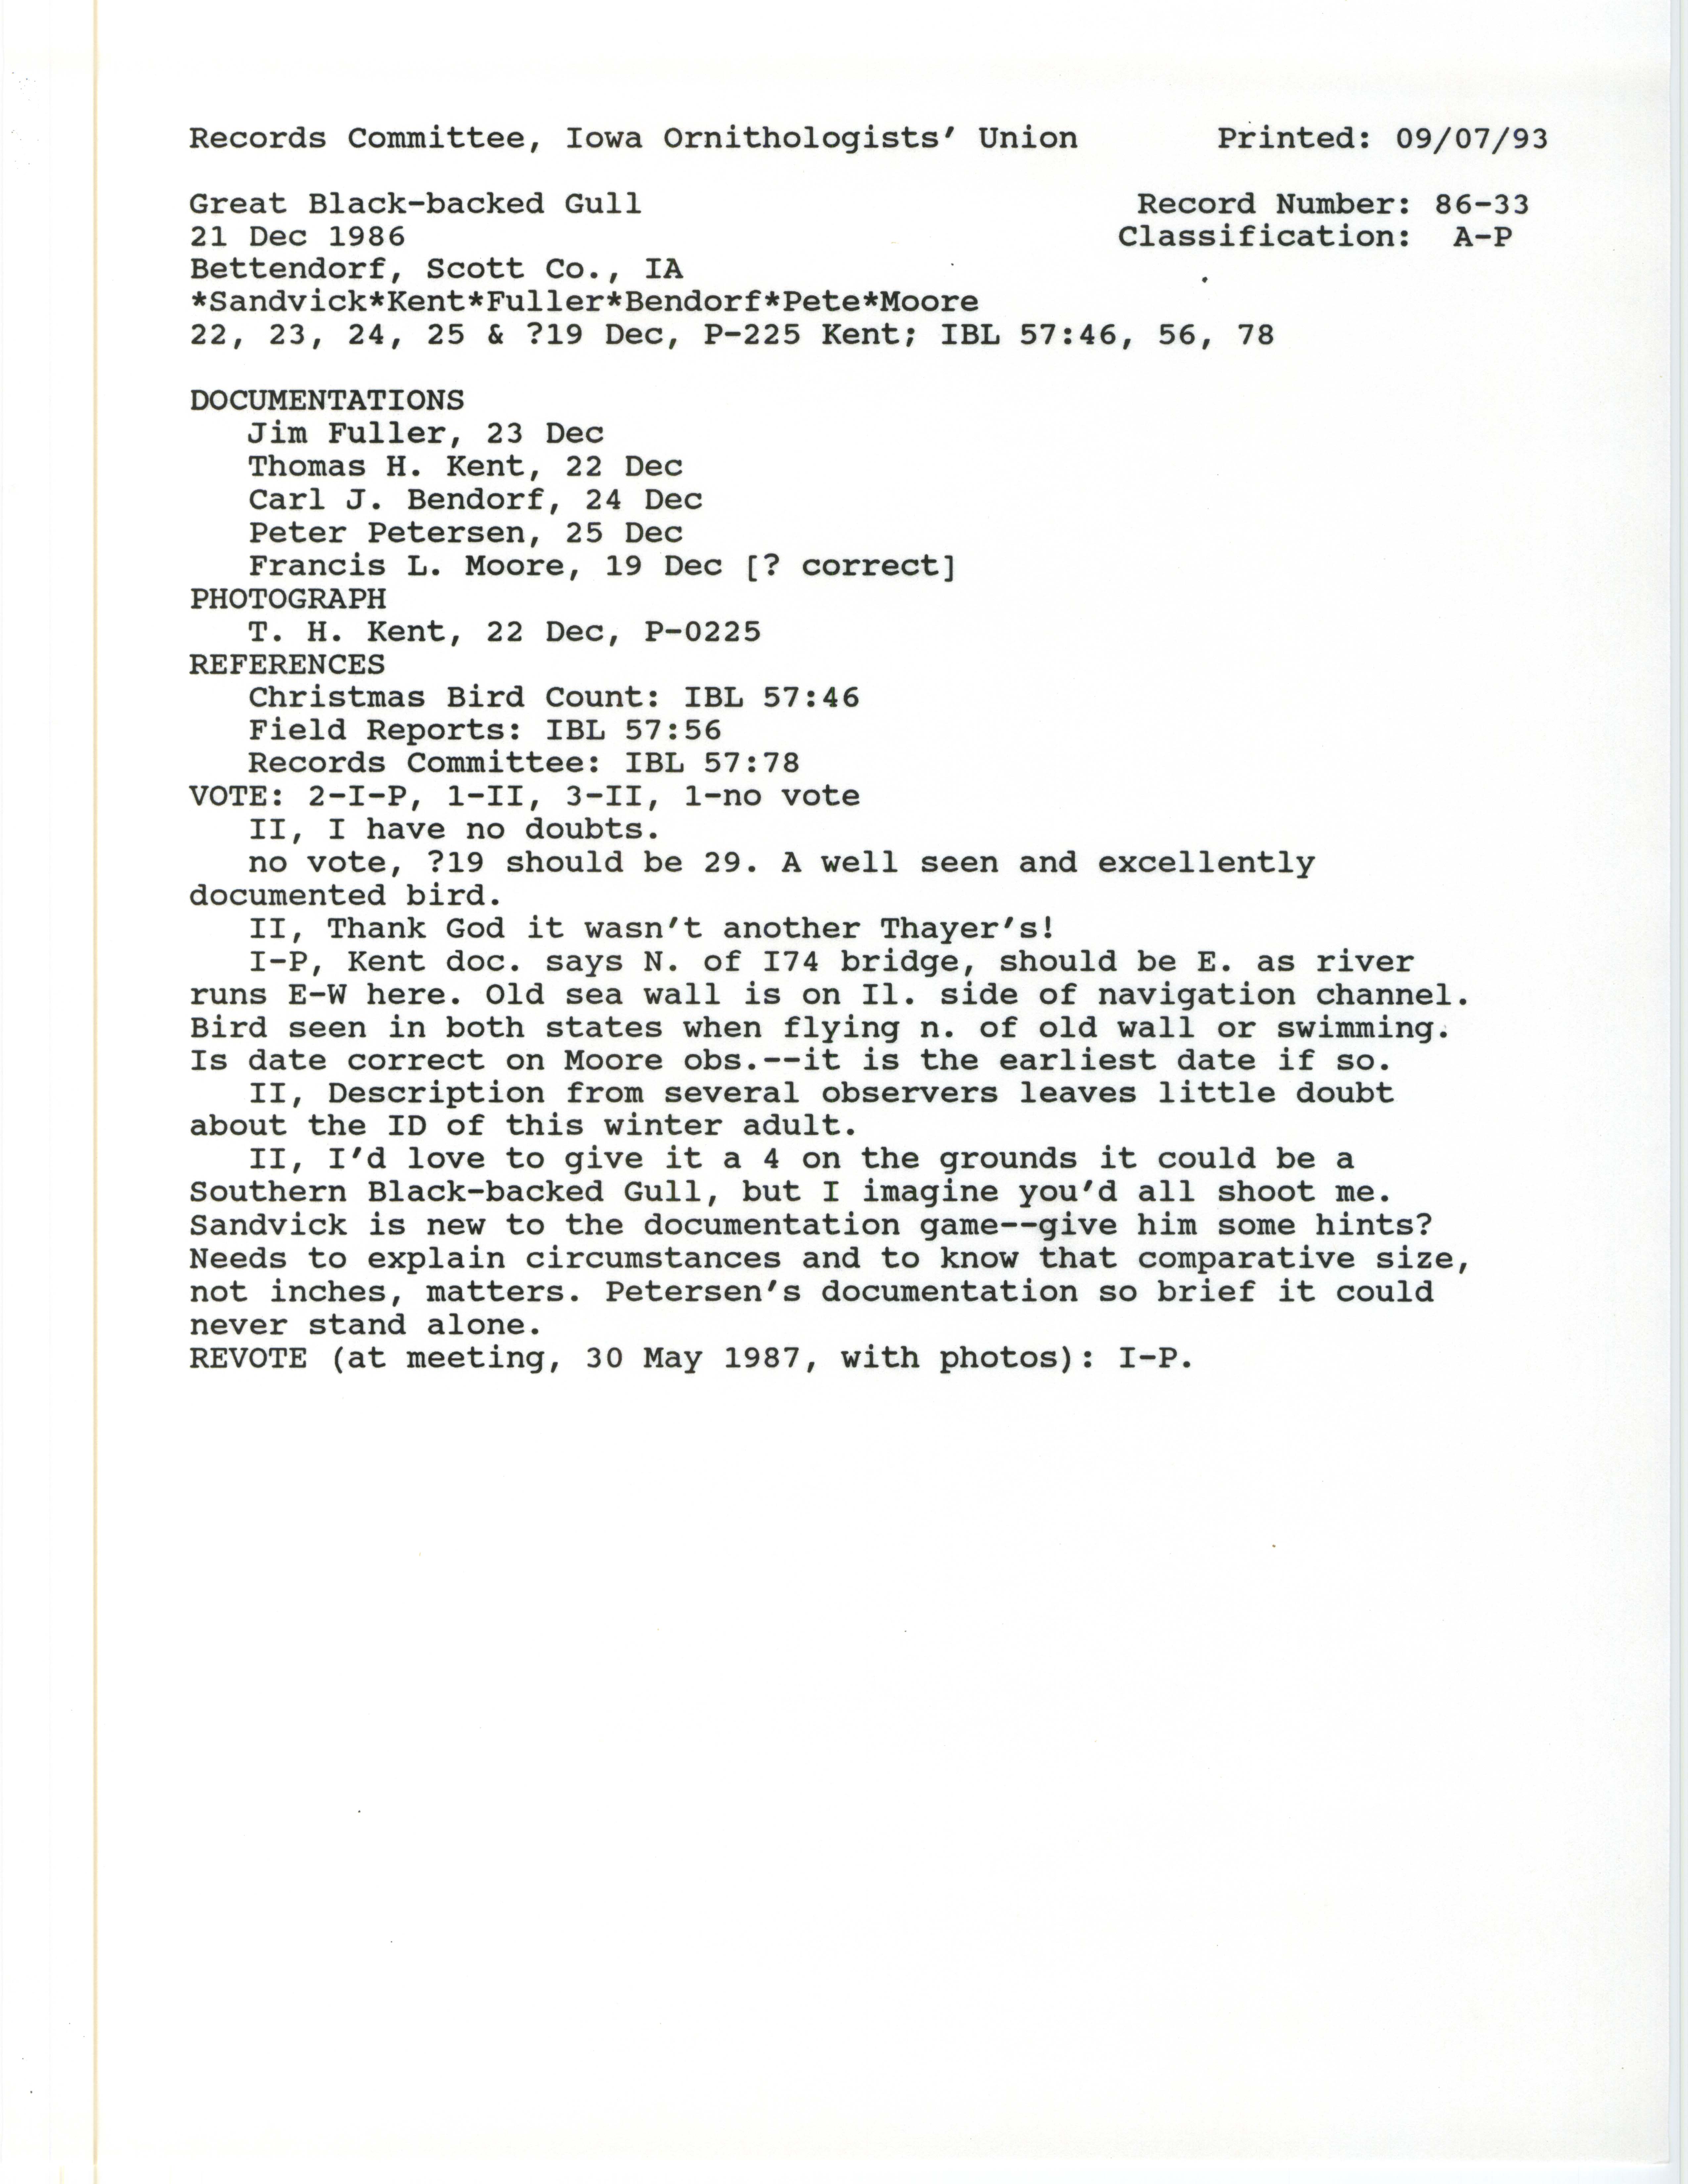 Records Committee review for rare bird sighting of Great Black-backed Gull near the Ben Butterworth Parkway in Moline, 1986